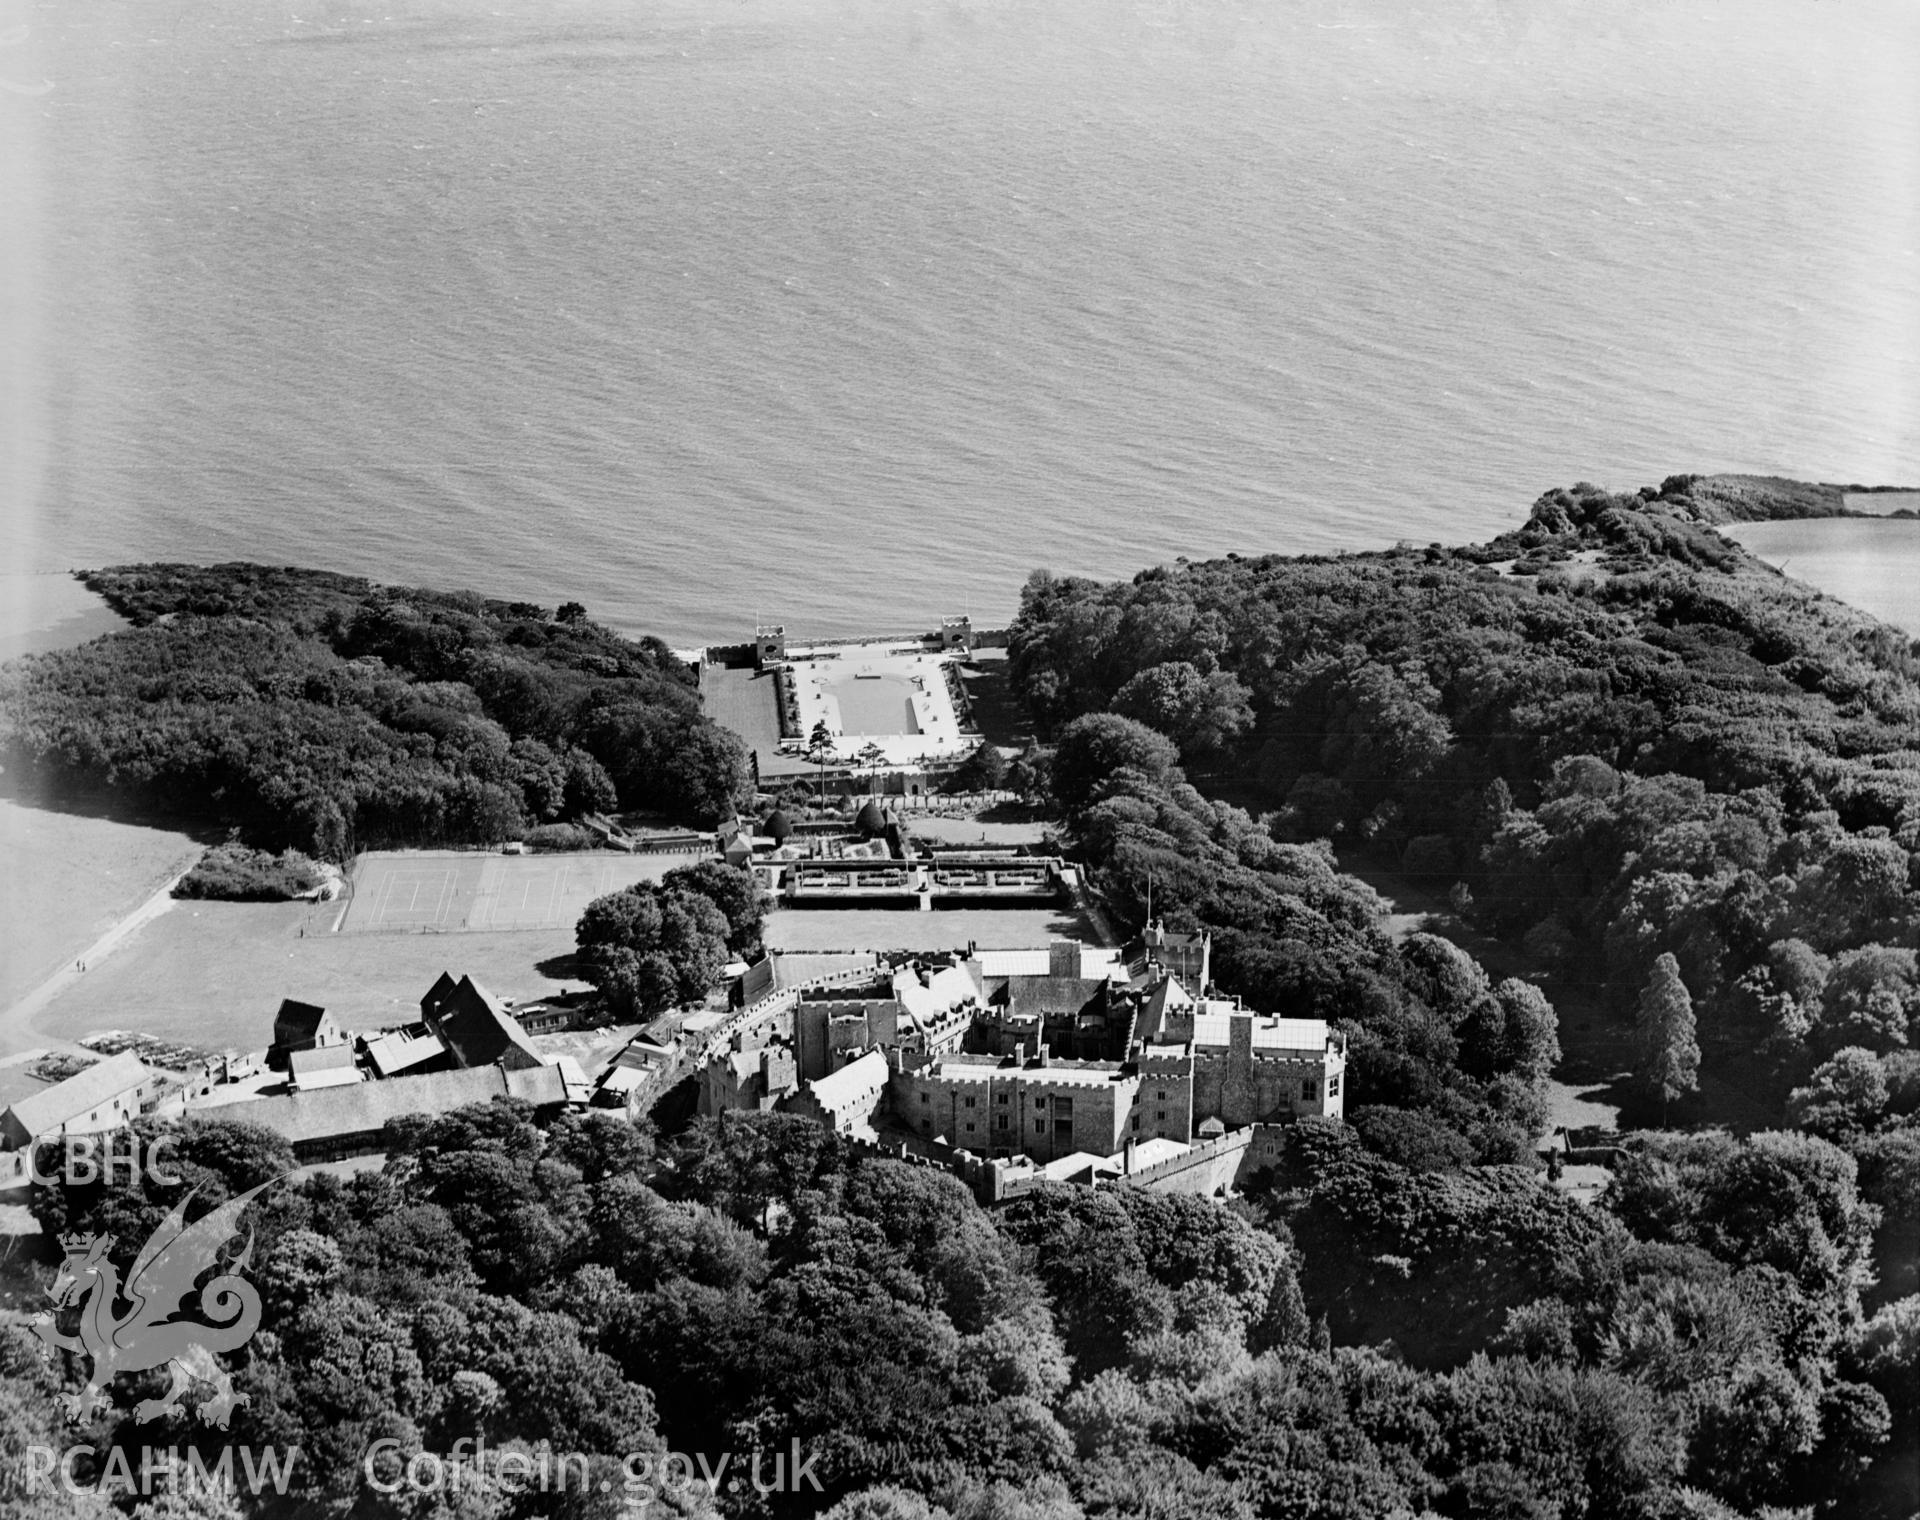 View of St Donats Castle showing castle, grounds and swimming pool, oblique aerial view. 5?x4? black and white glass plate negative.